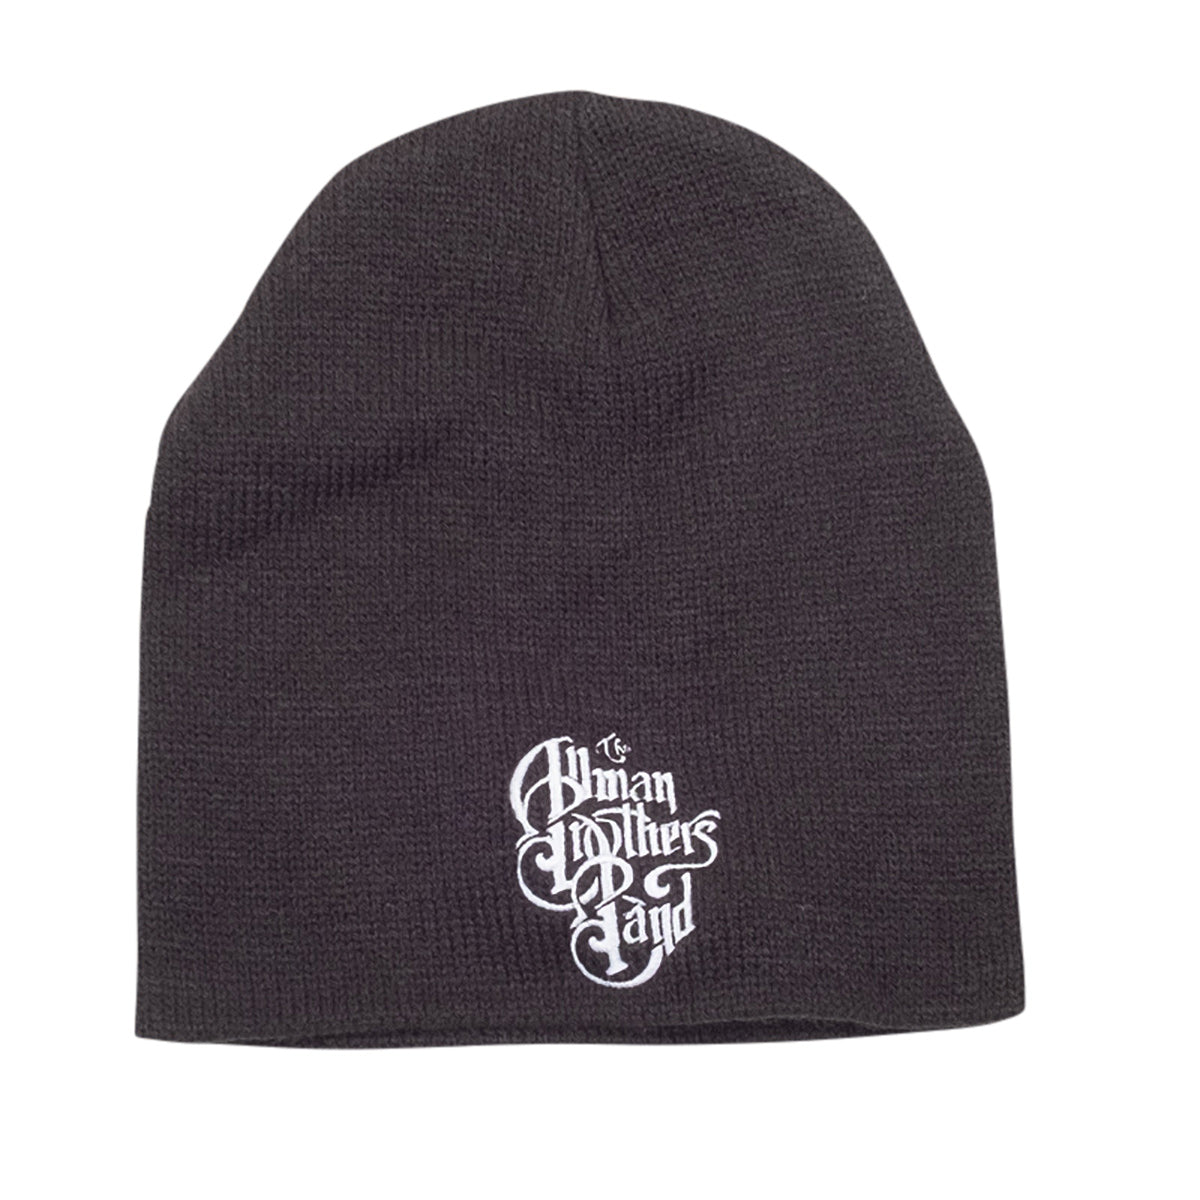 Allman Brothers Band Stacked Logo Knitted Ski Cap